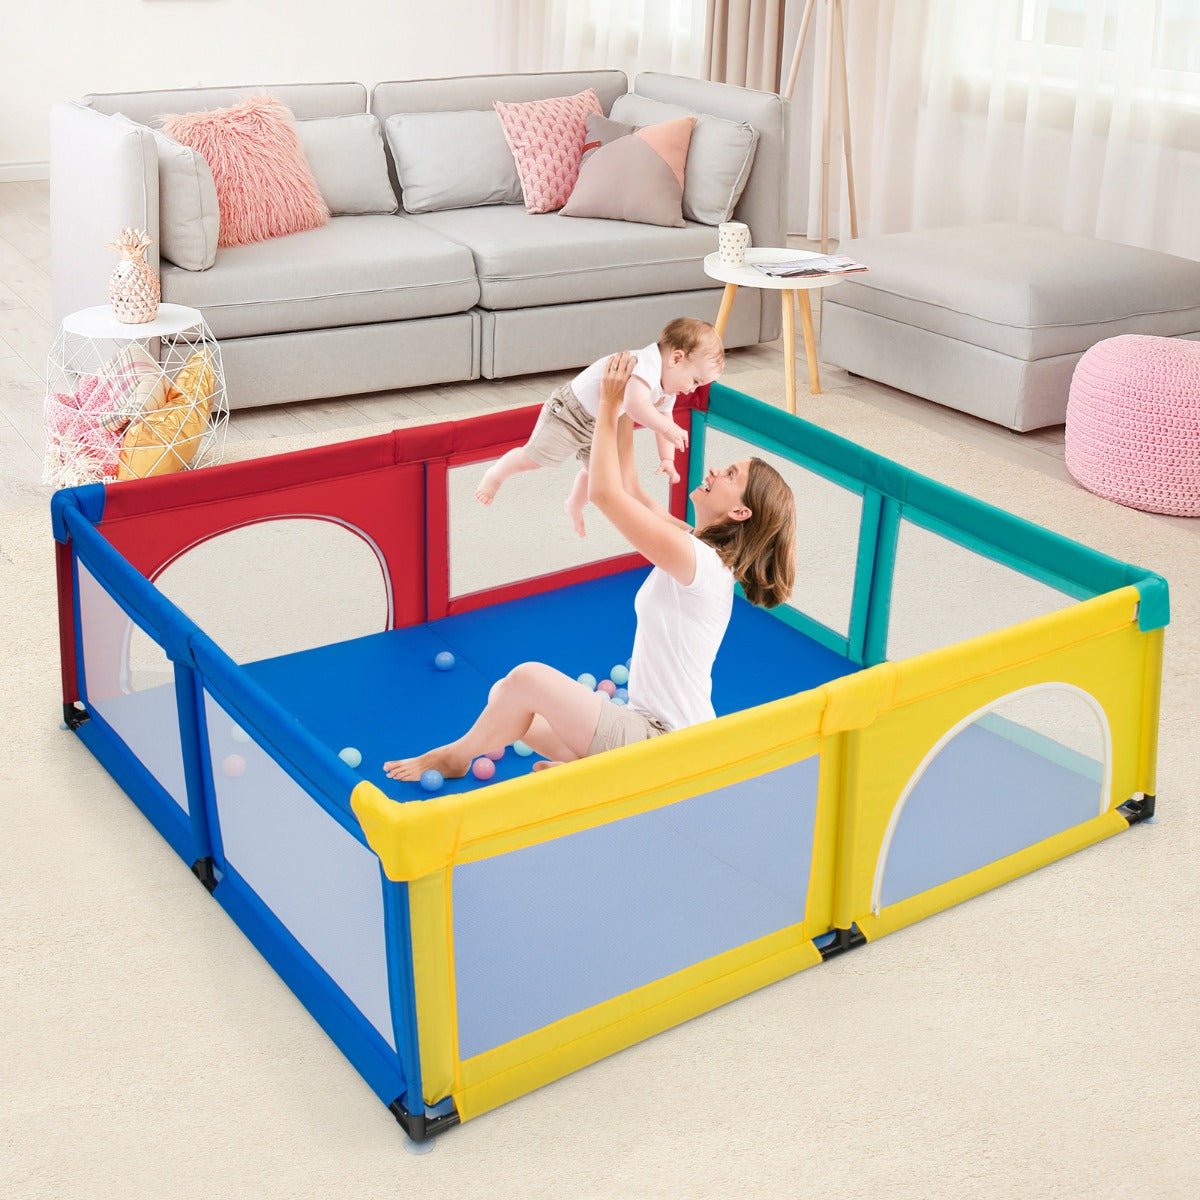 Baby Playpen with Safety Gates & Mesh Walls: Extra Large Design in Multicolour